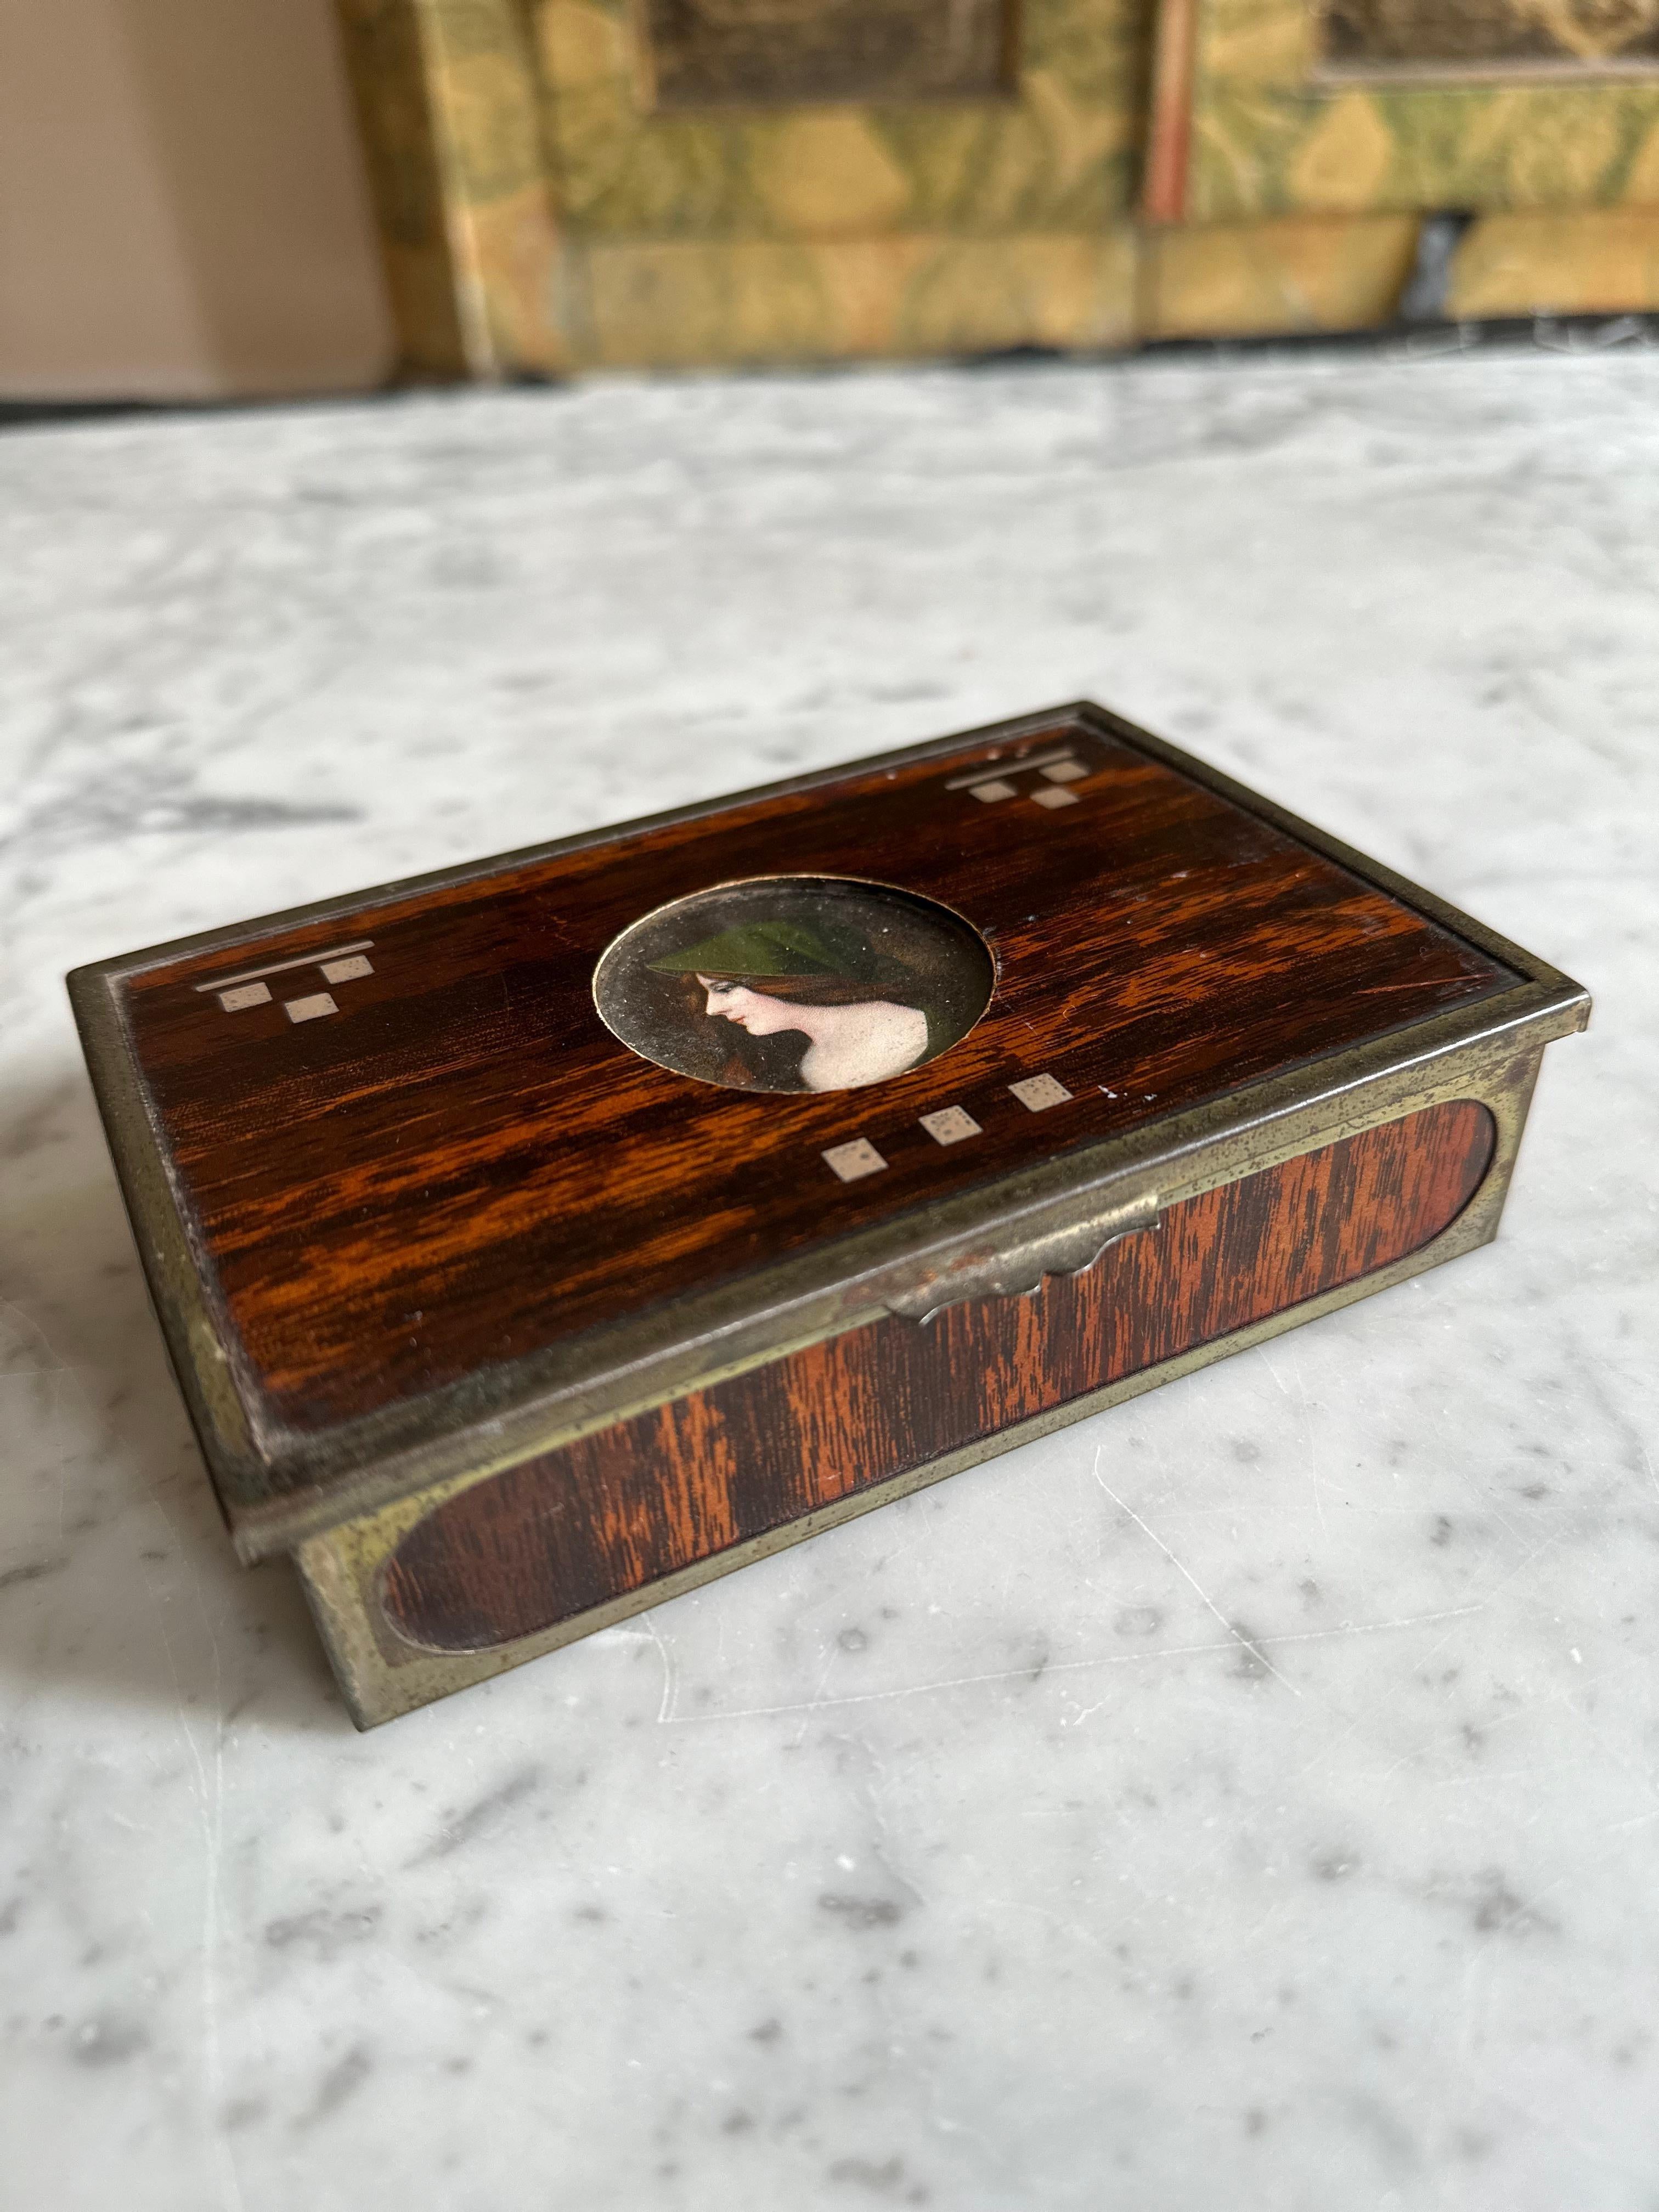 Introducing our exquisite Small Rectangular Box, a beautiful relic from the turn of the 20th century that showcases a captivating blend of artistic styles. This charming box is a testament to the craftsmanship and design sensibilities of its